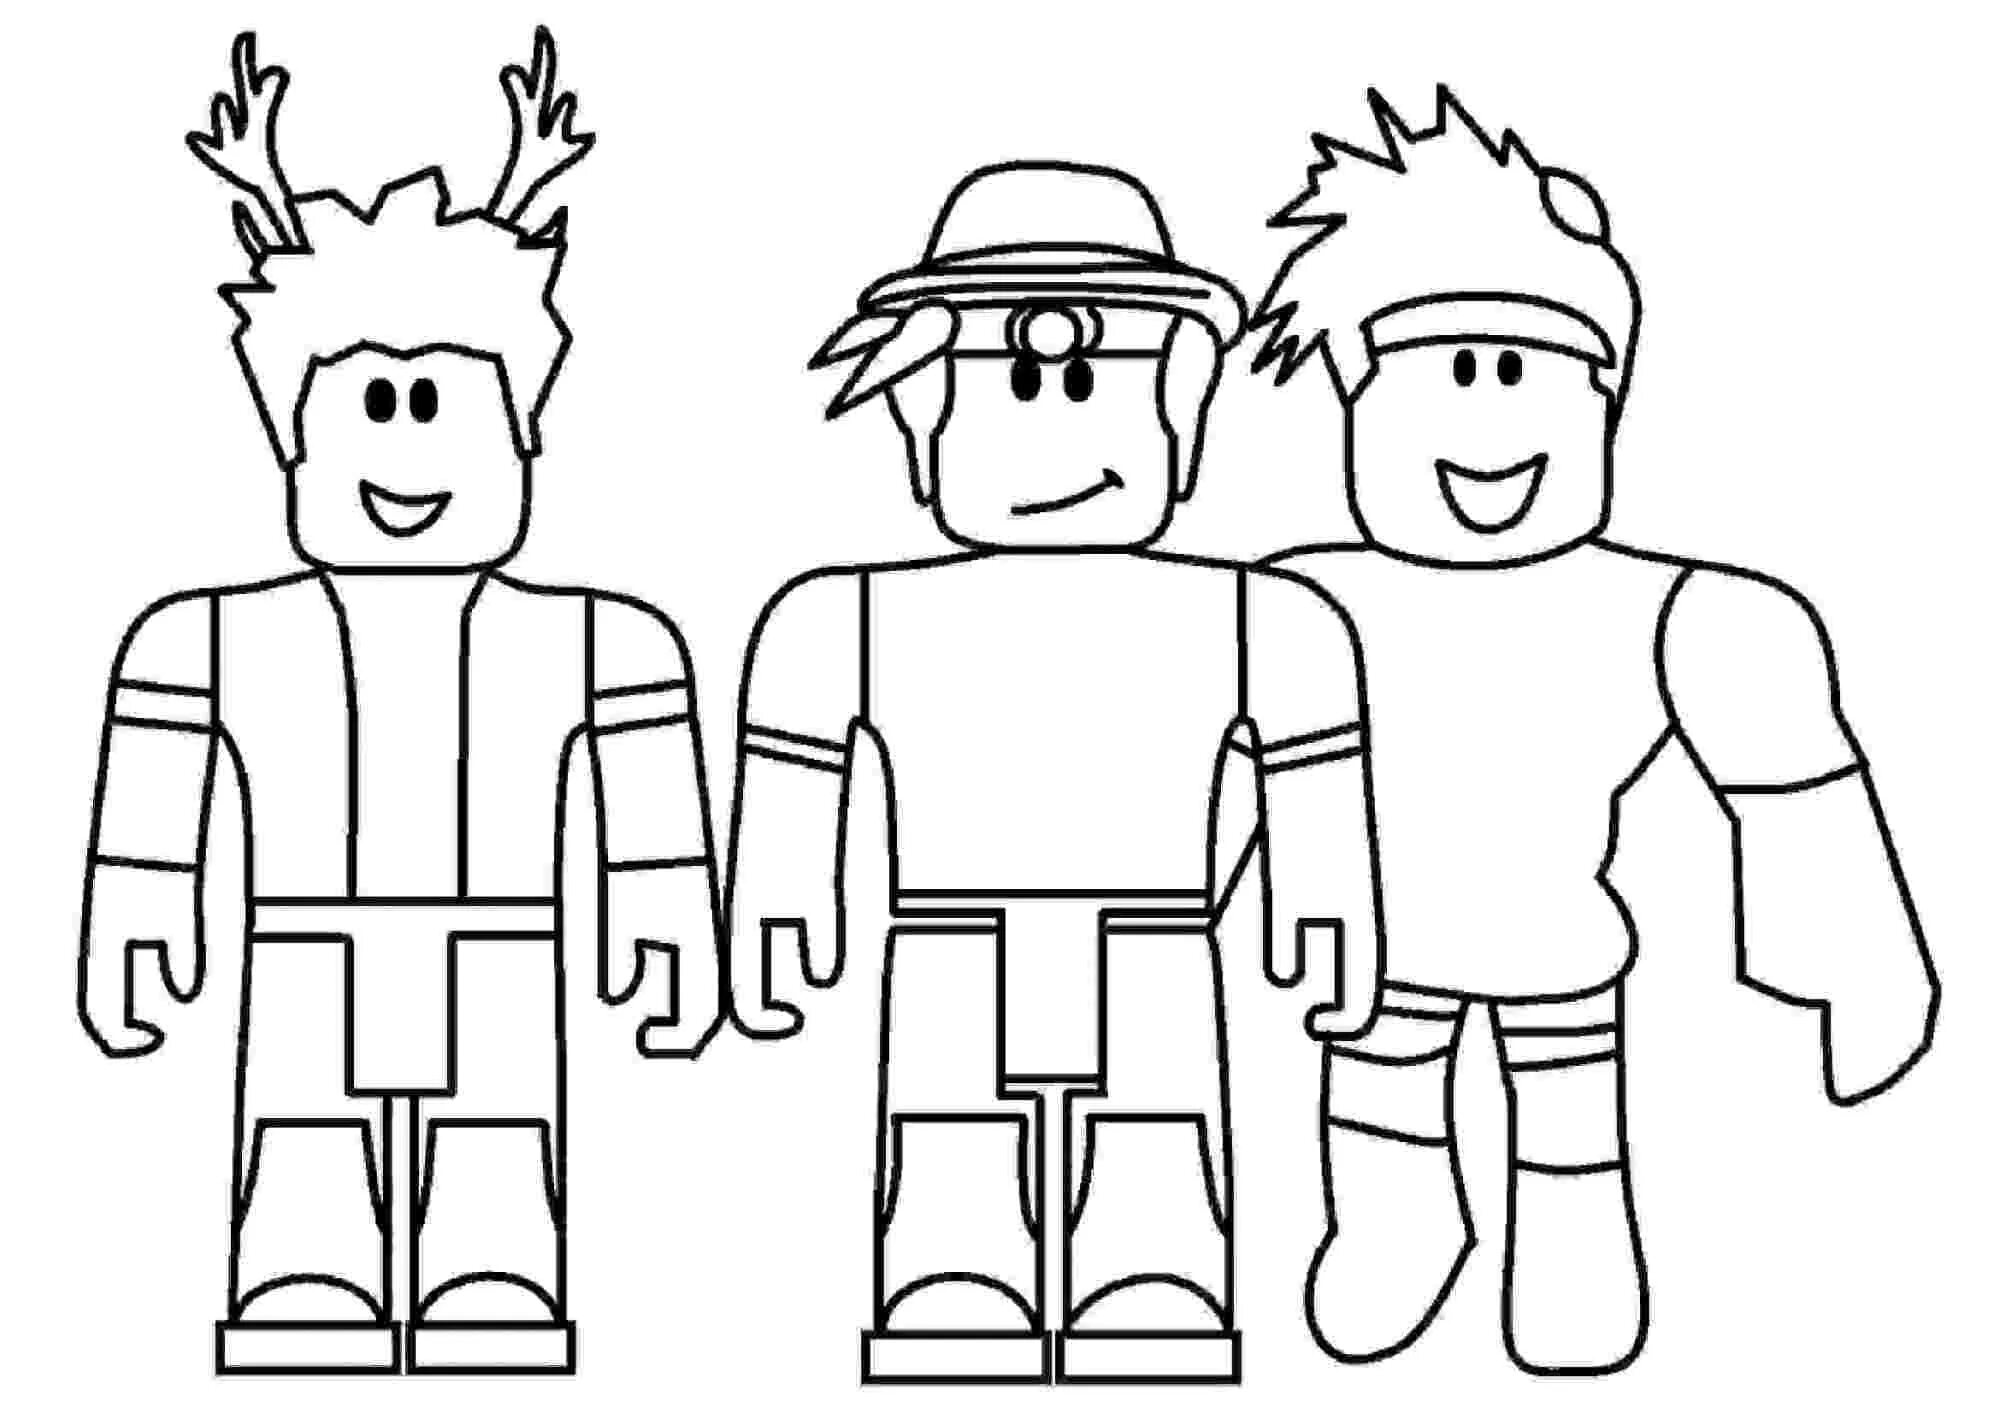 Roblox characters #3